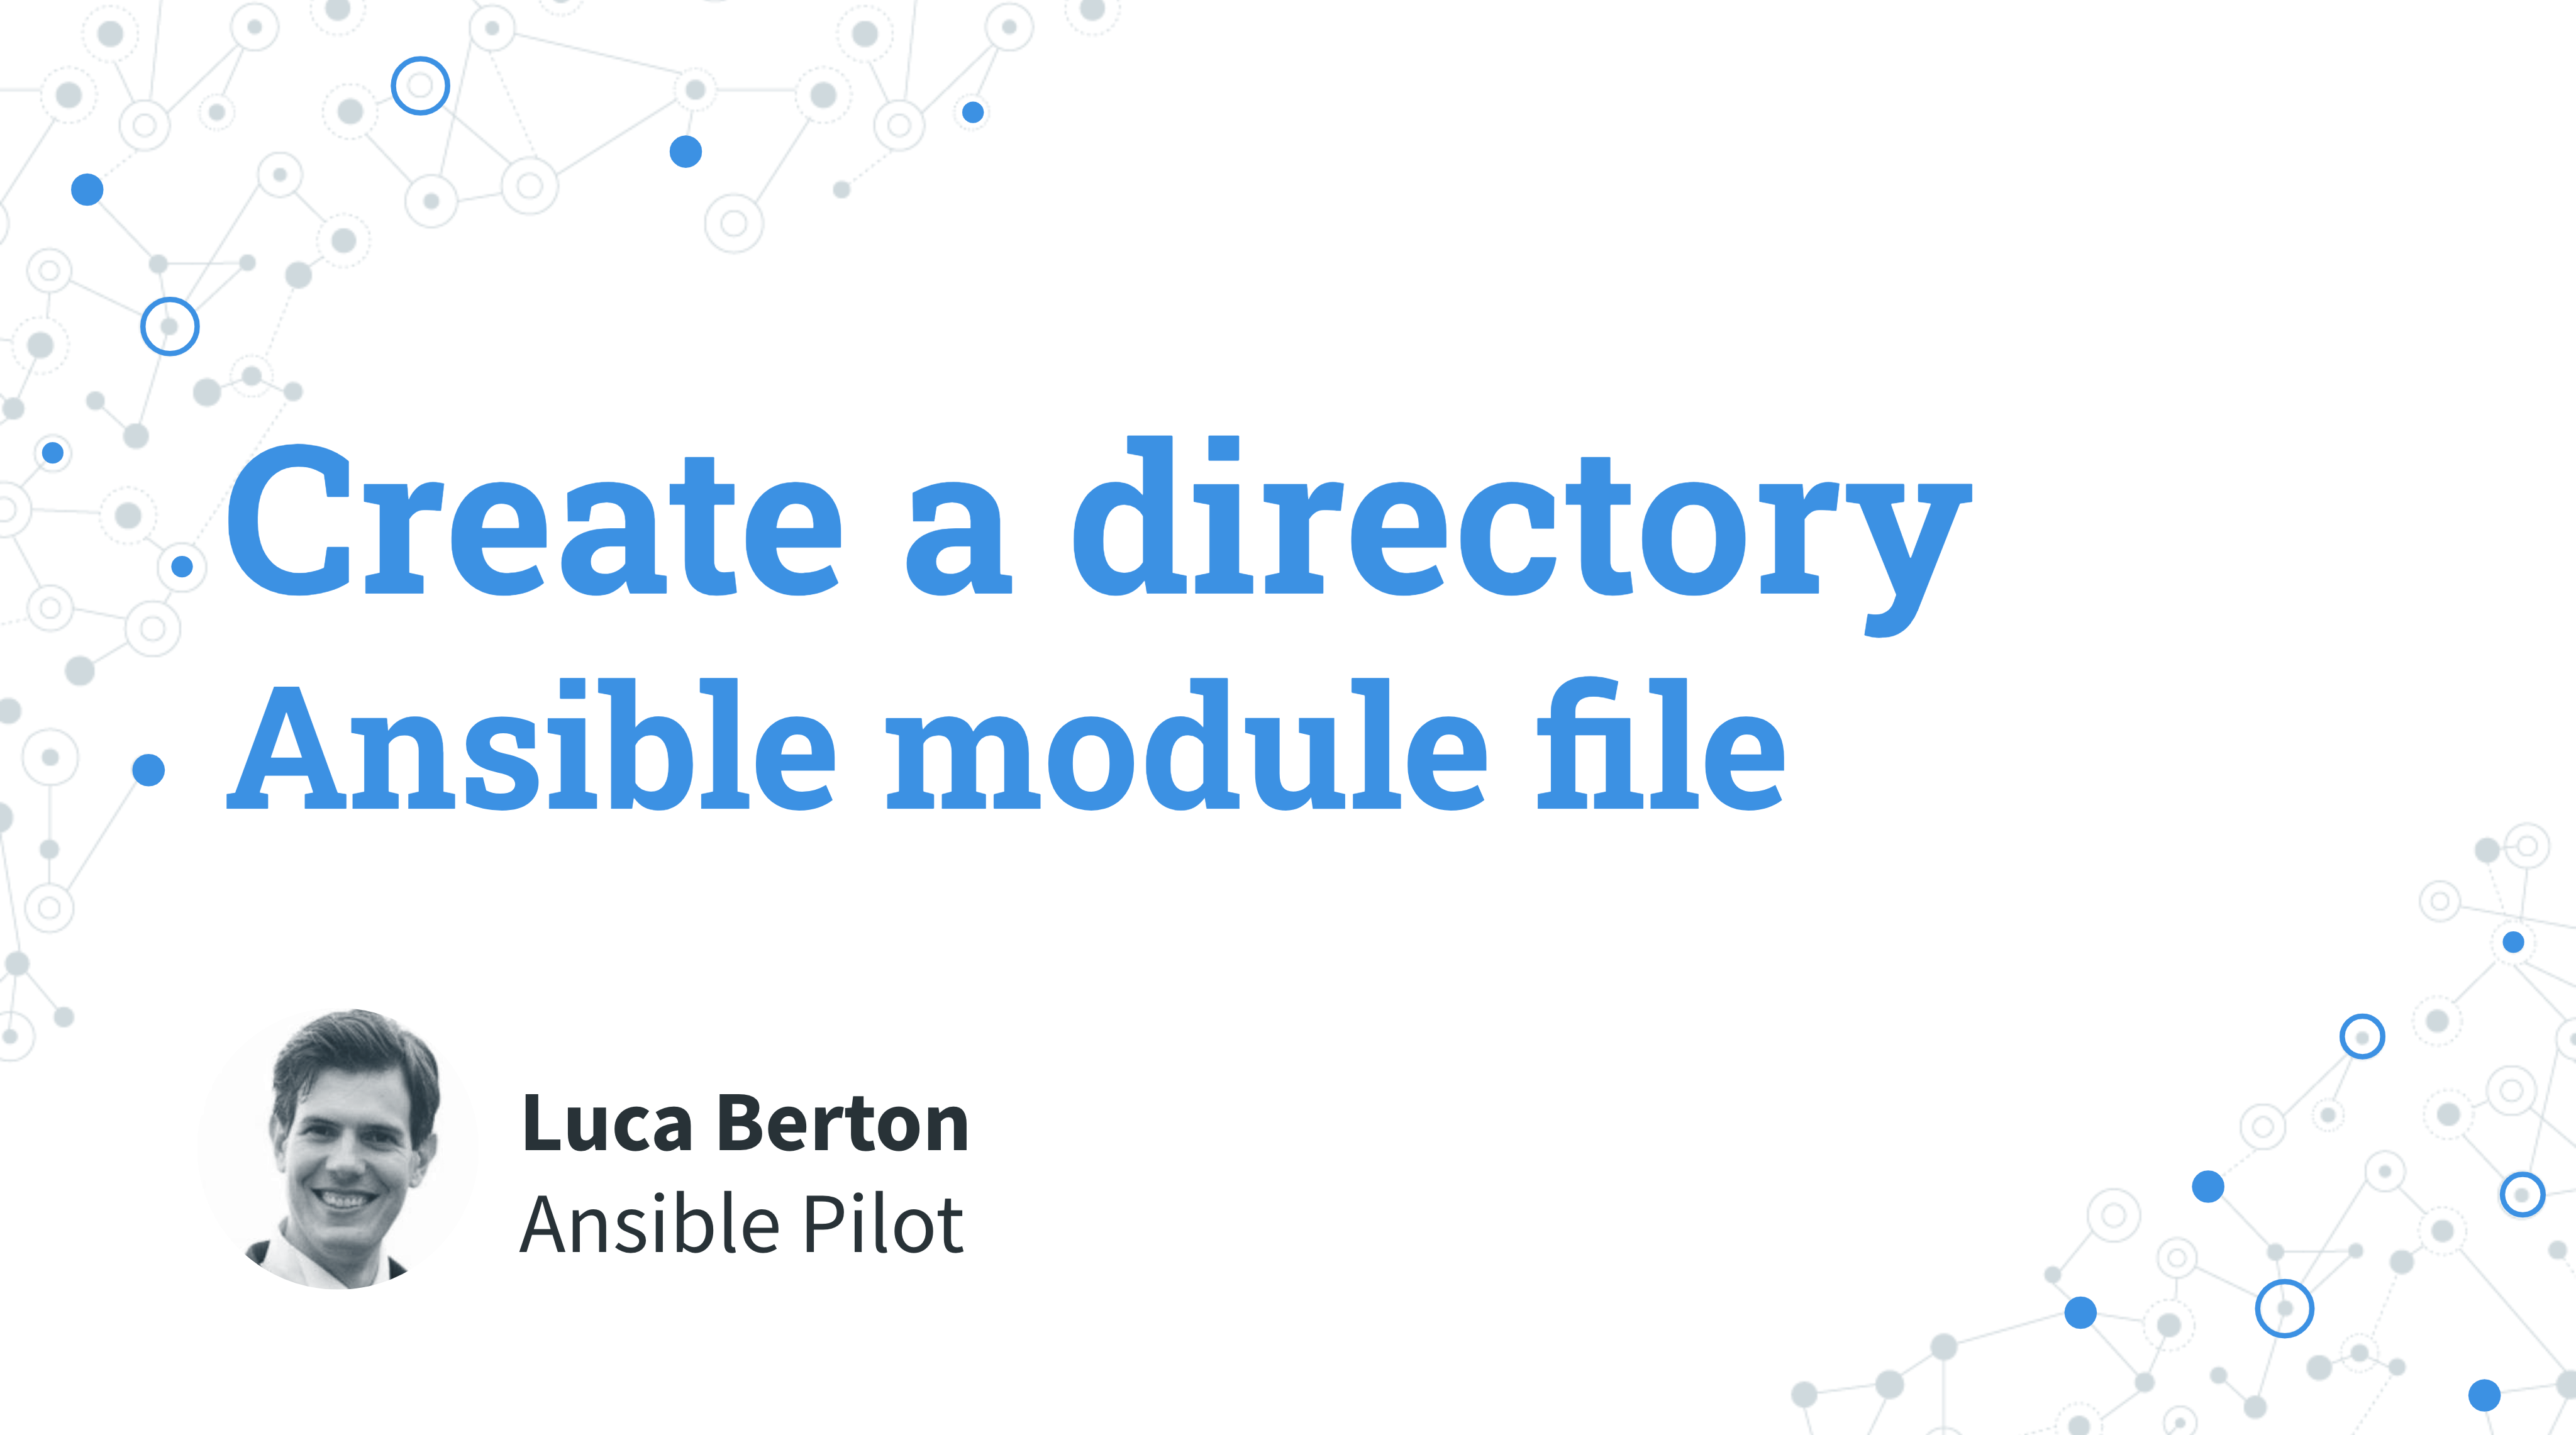 Create a directory in Linux - Ansible module file